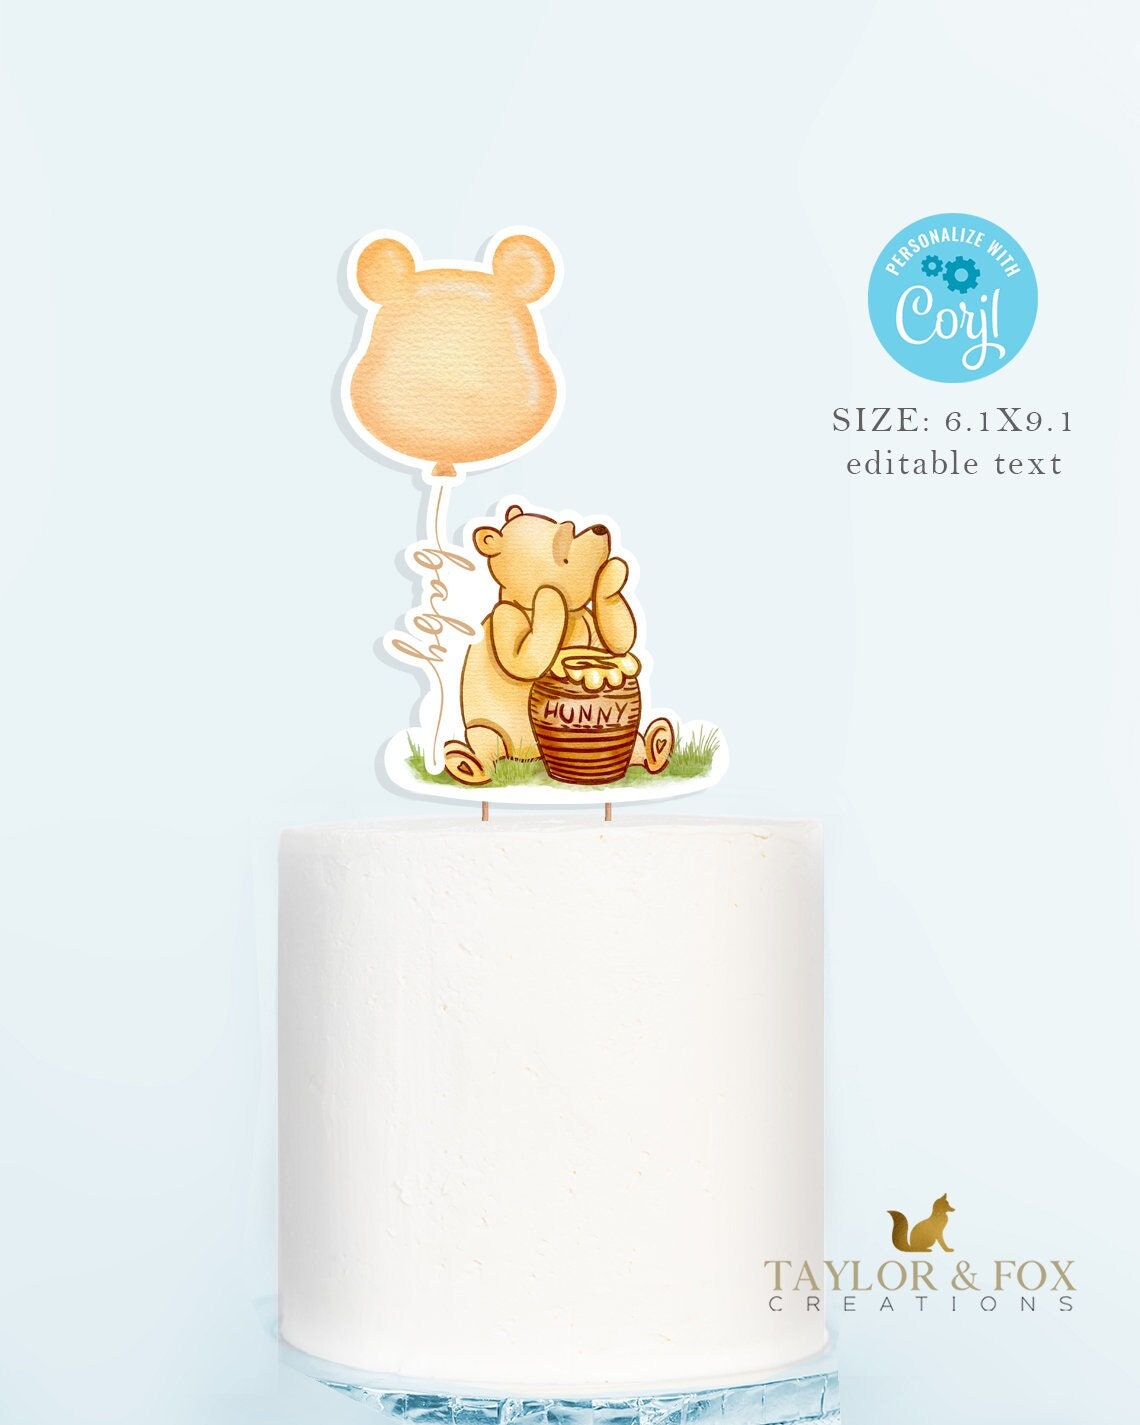 Winnie the Pooh Cake Topper for Boy or Girl 